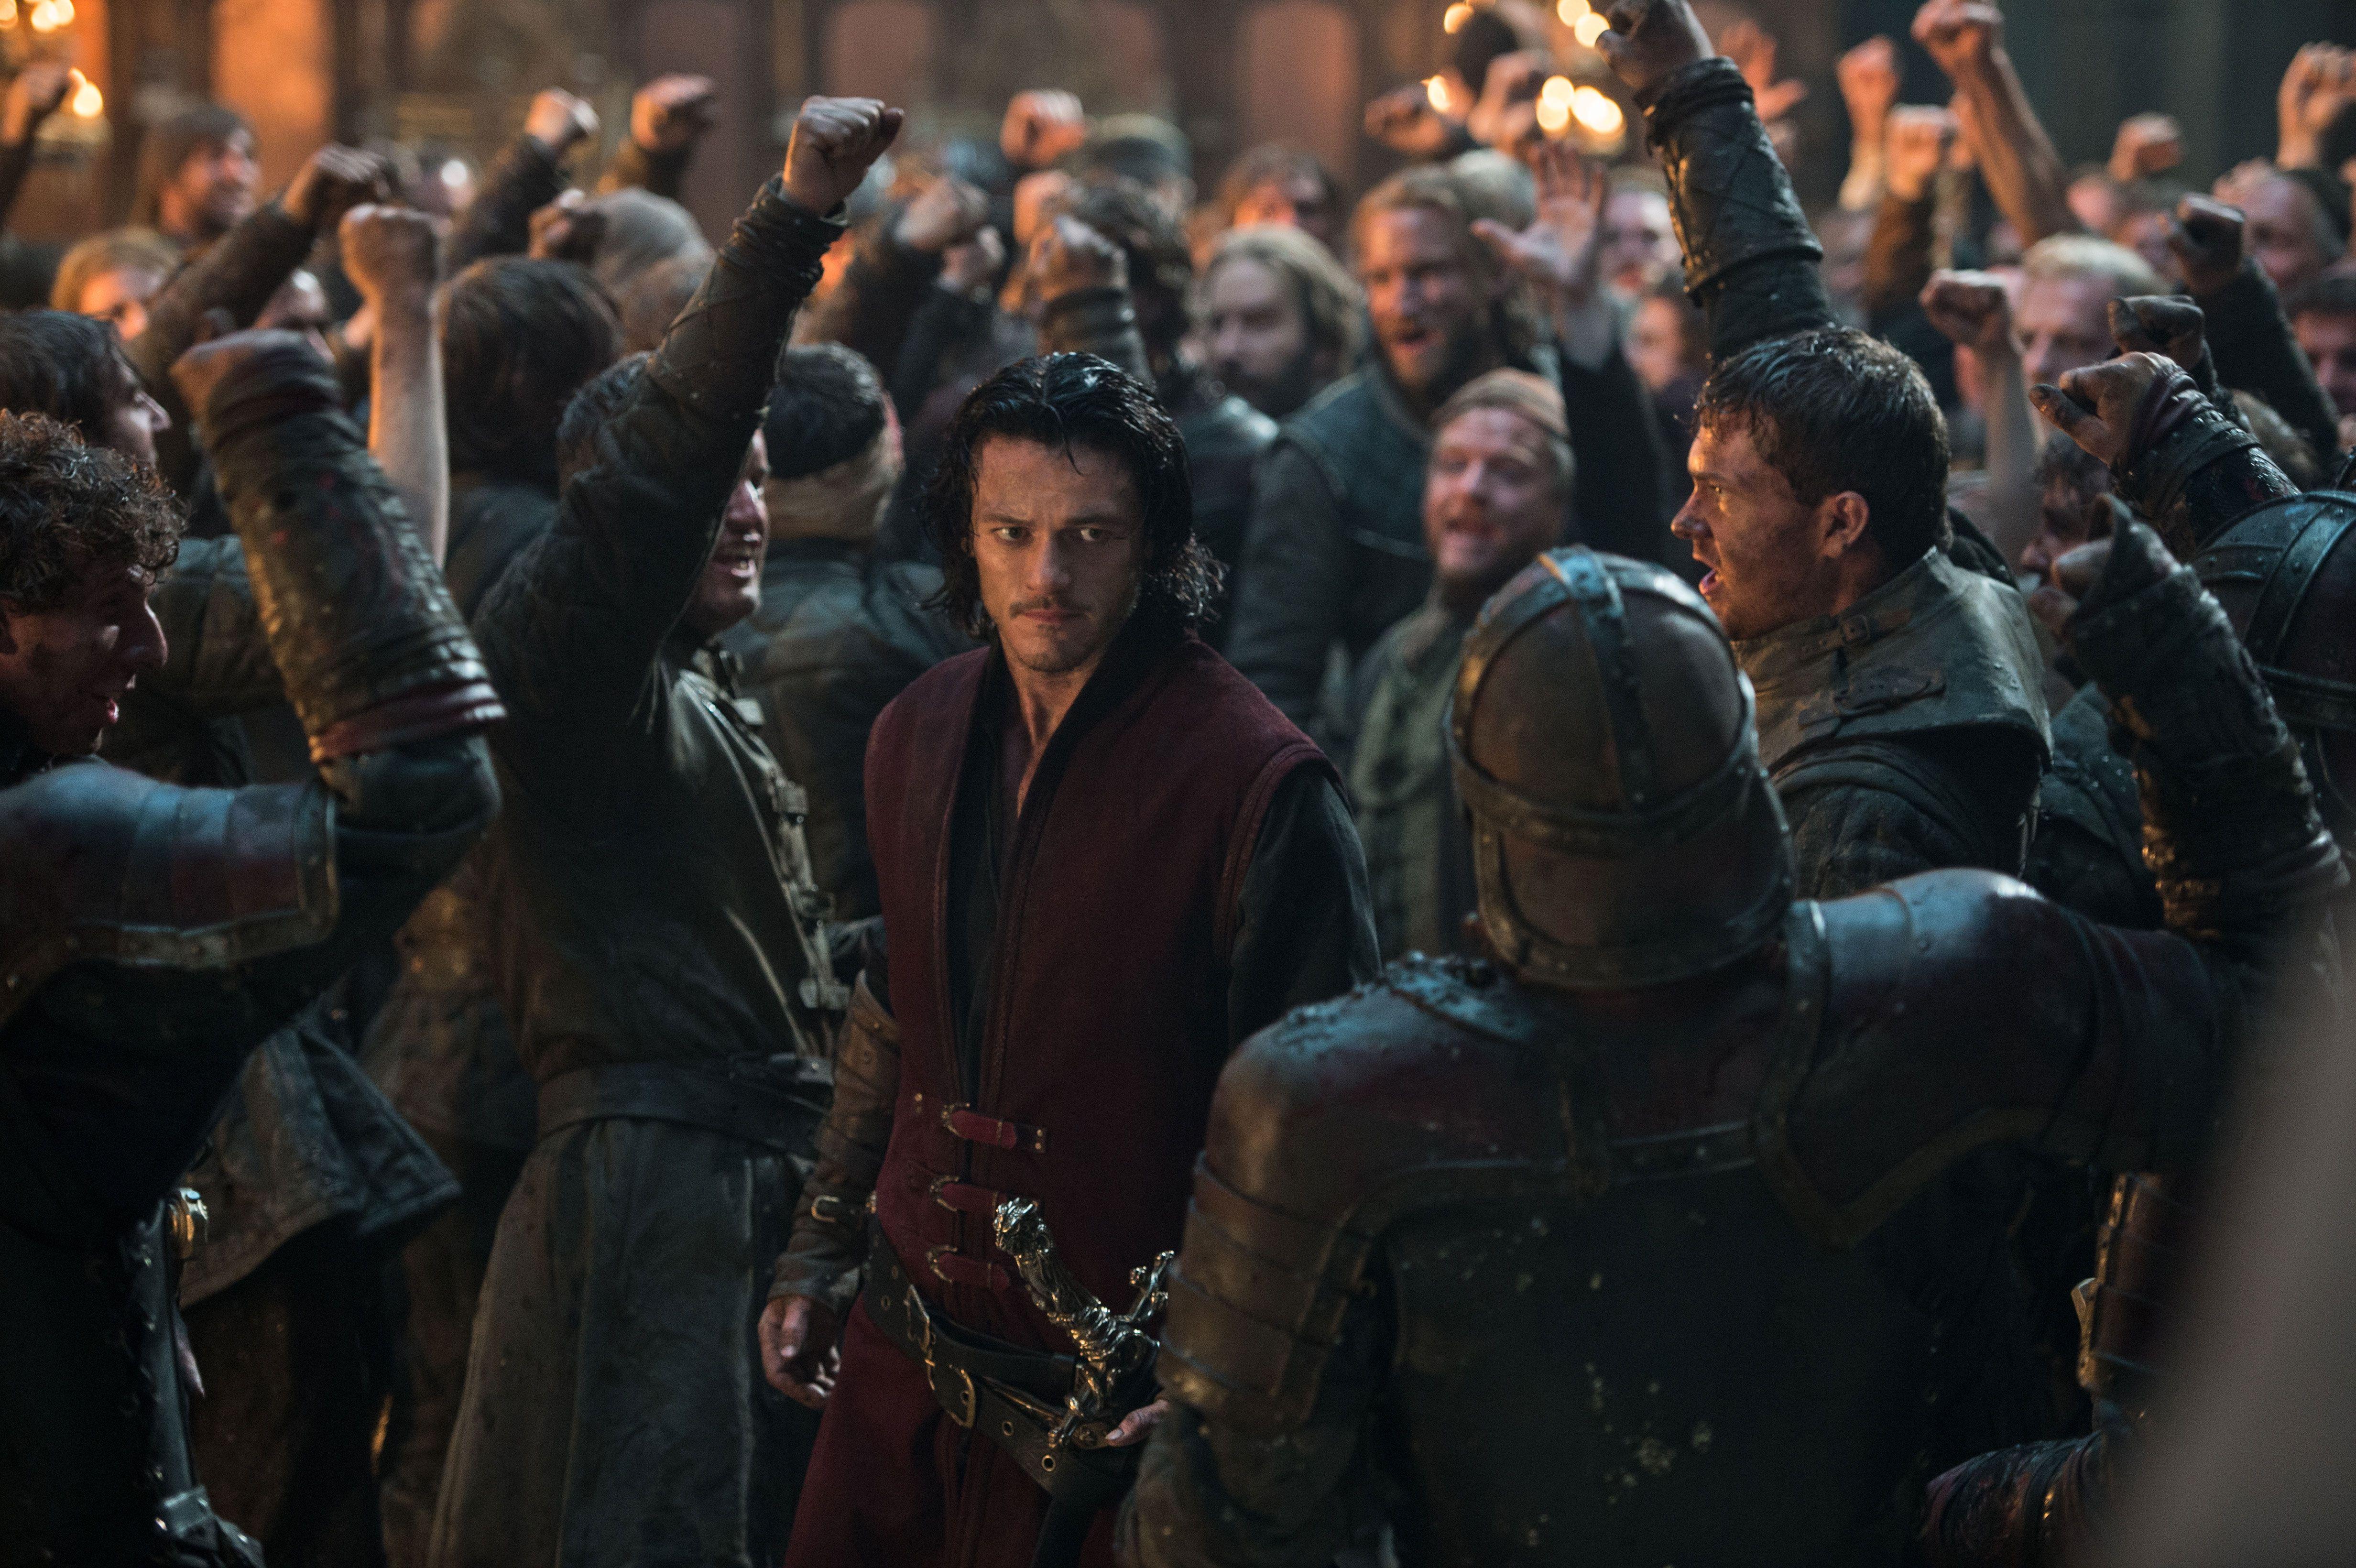 New Image From Dracula's 'Untold' Story